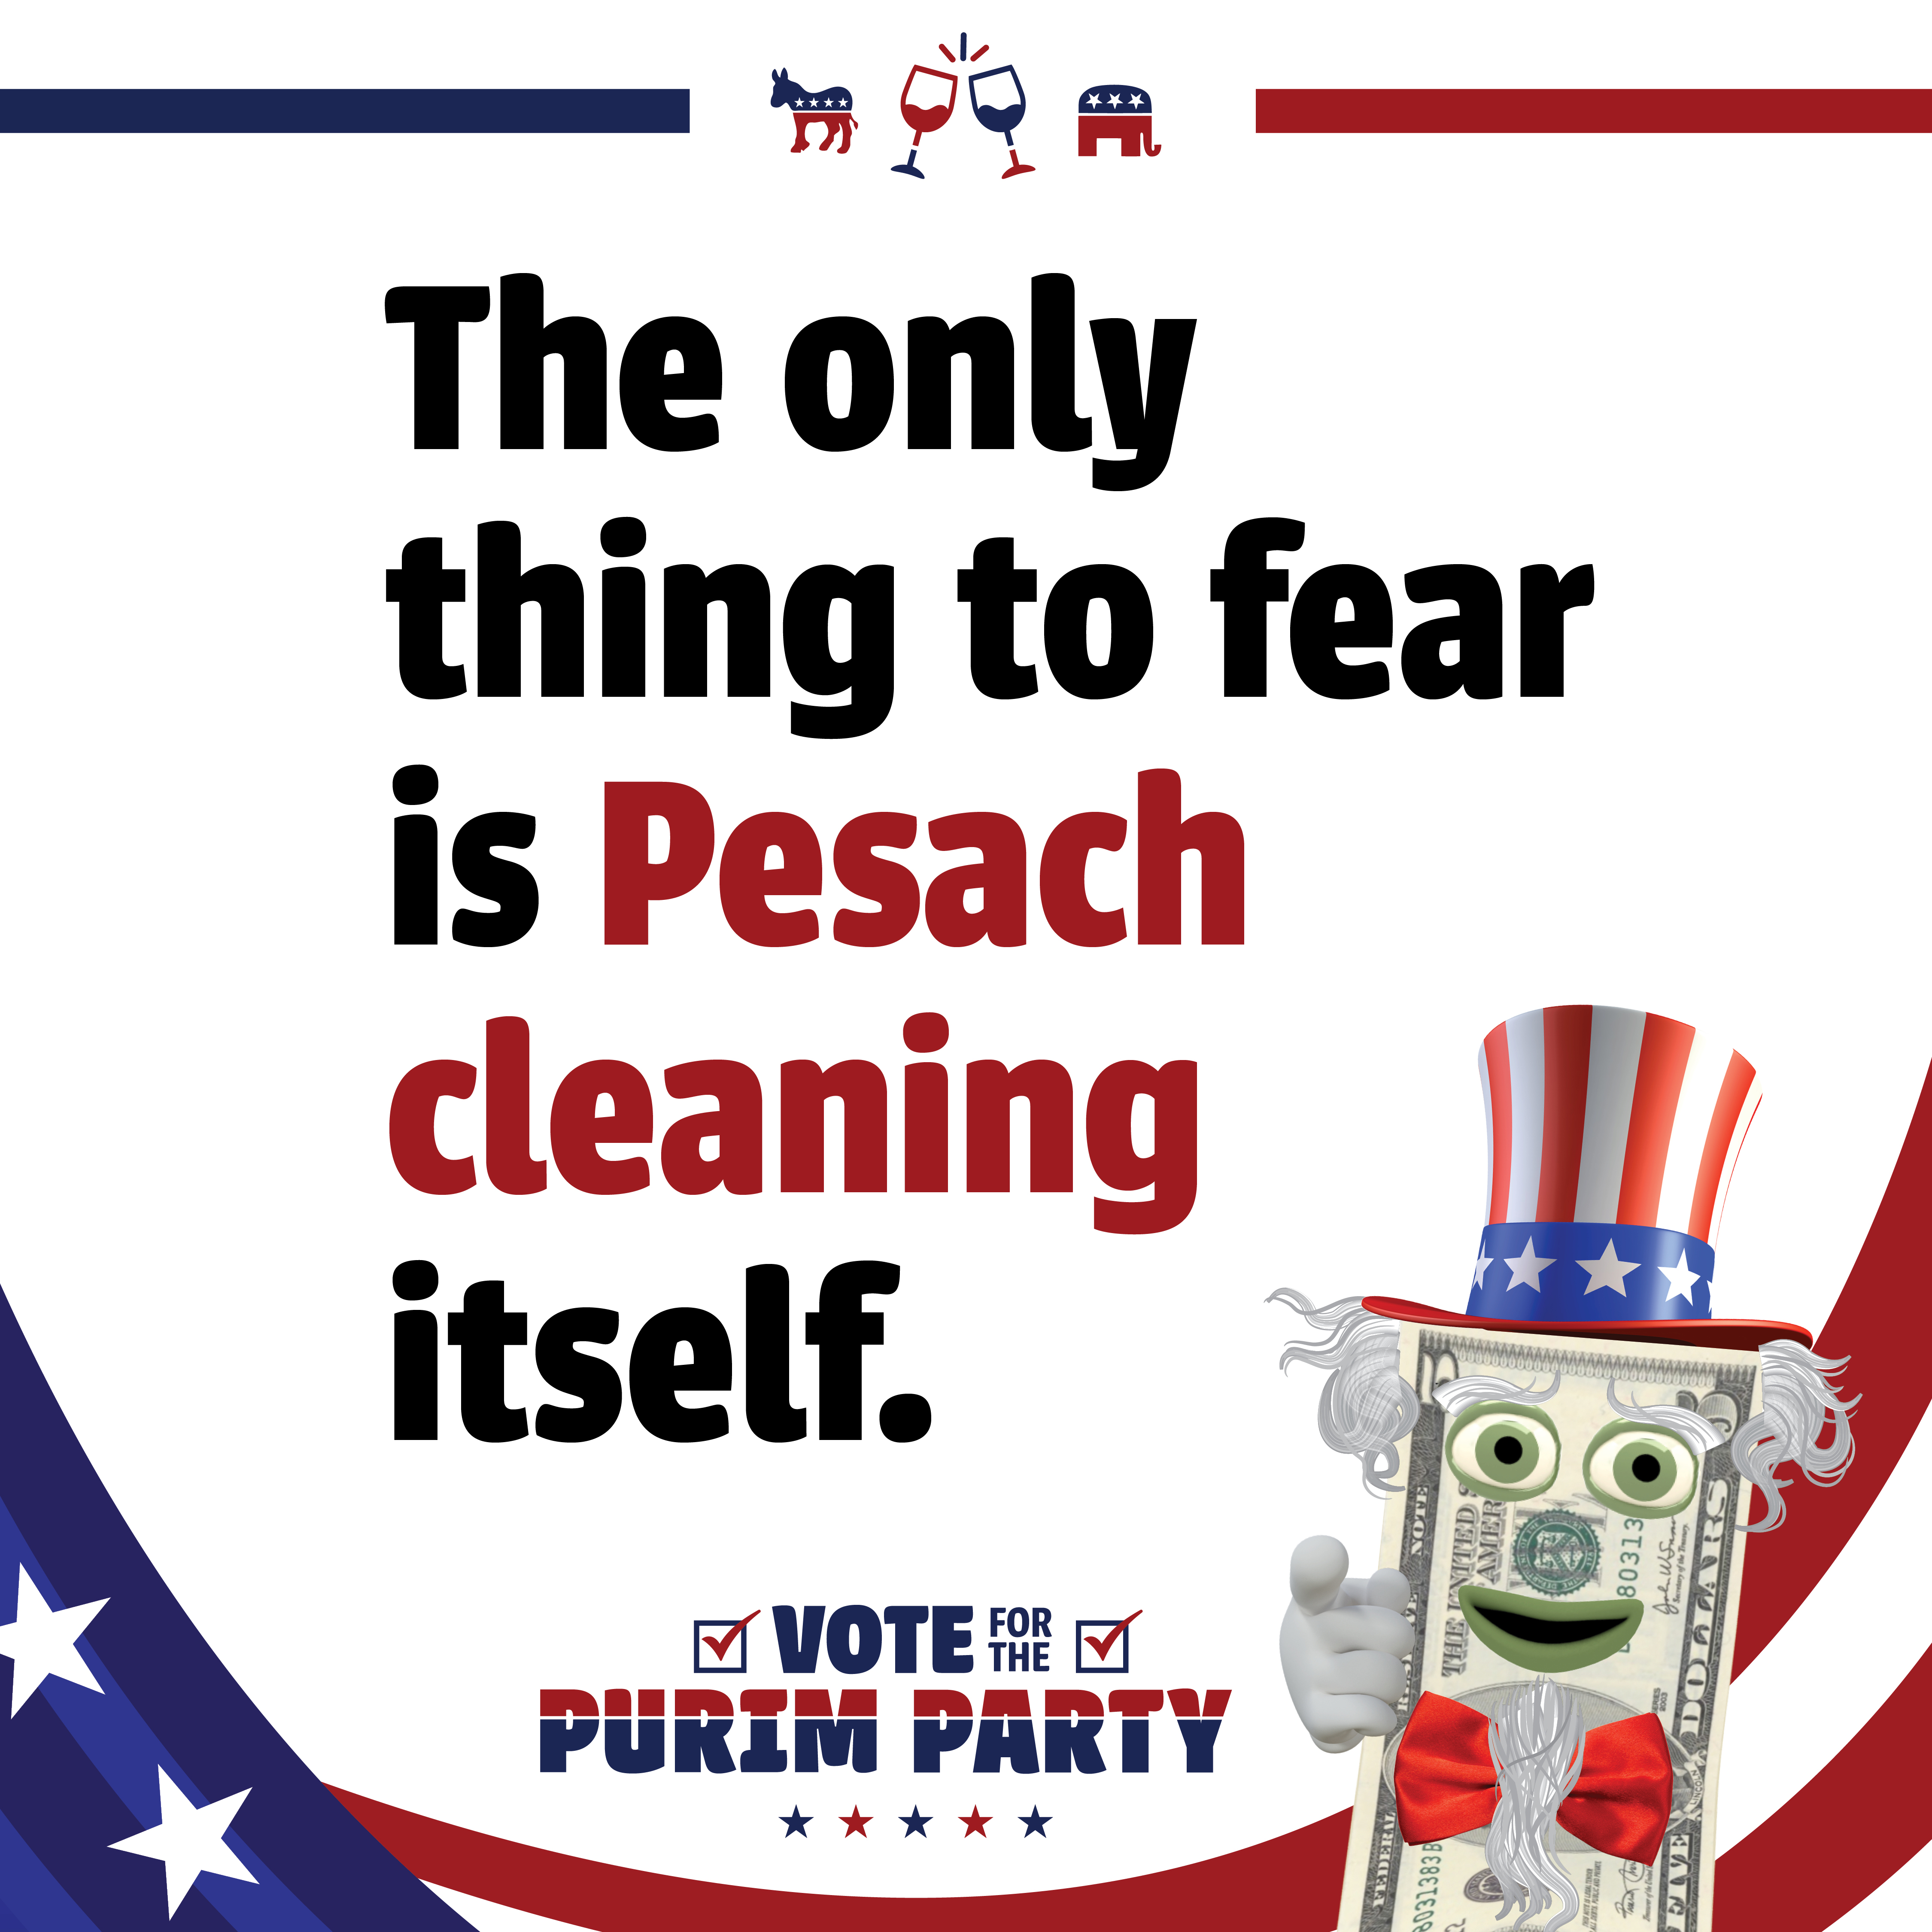 The only thing to fear is Pesach cleaning itself.